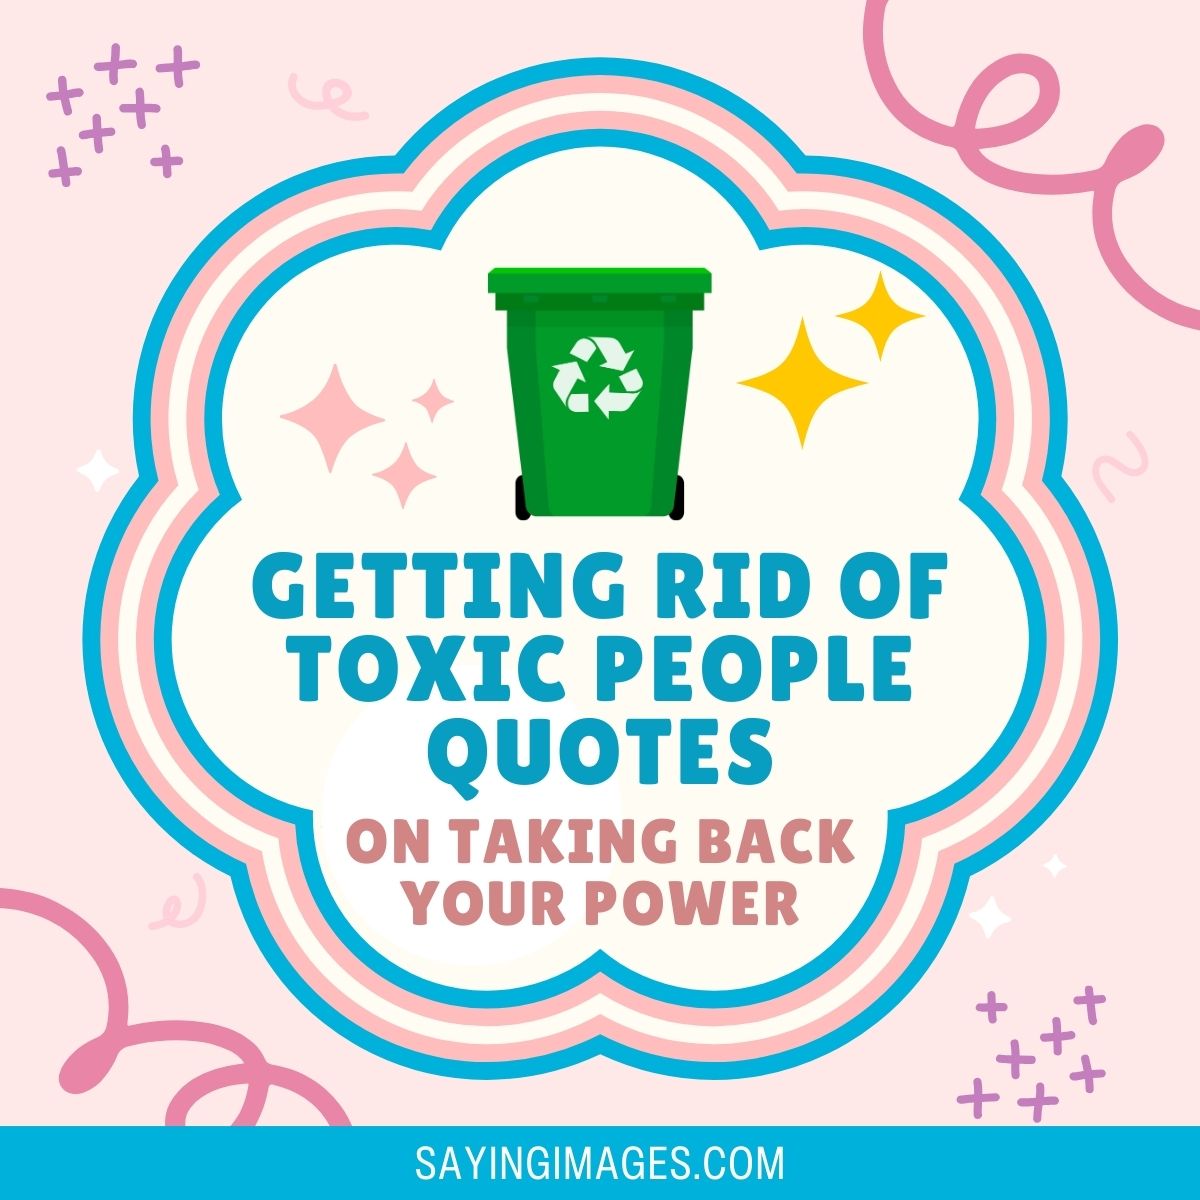 Getting Rid of Toxic People Quotes